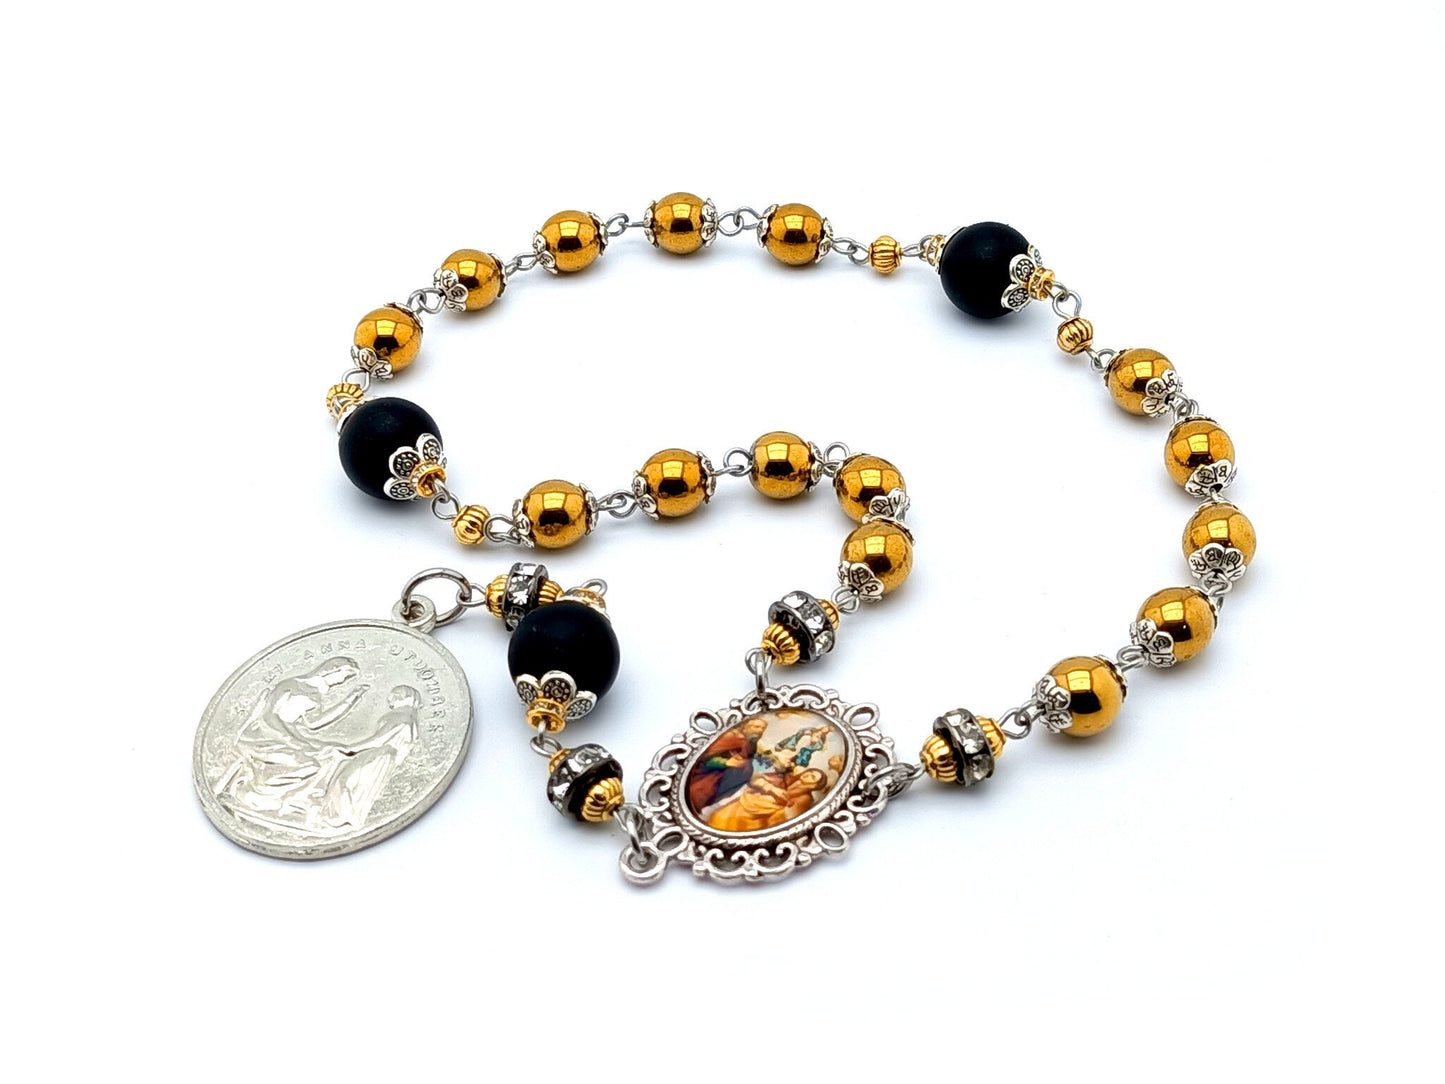 Saint Ann unique rosary beads prayer chaplet with gold hematite and onyx gemstone beads, silver picture centre medal and end medal.